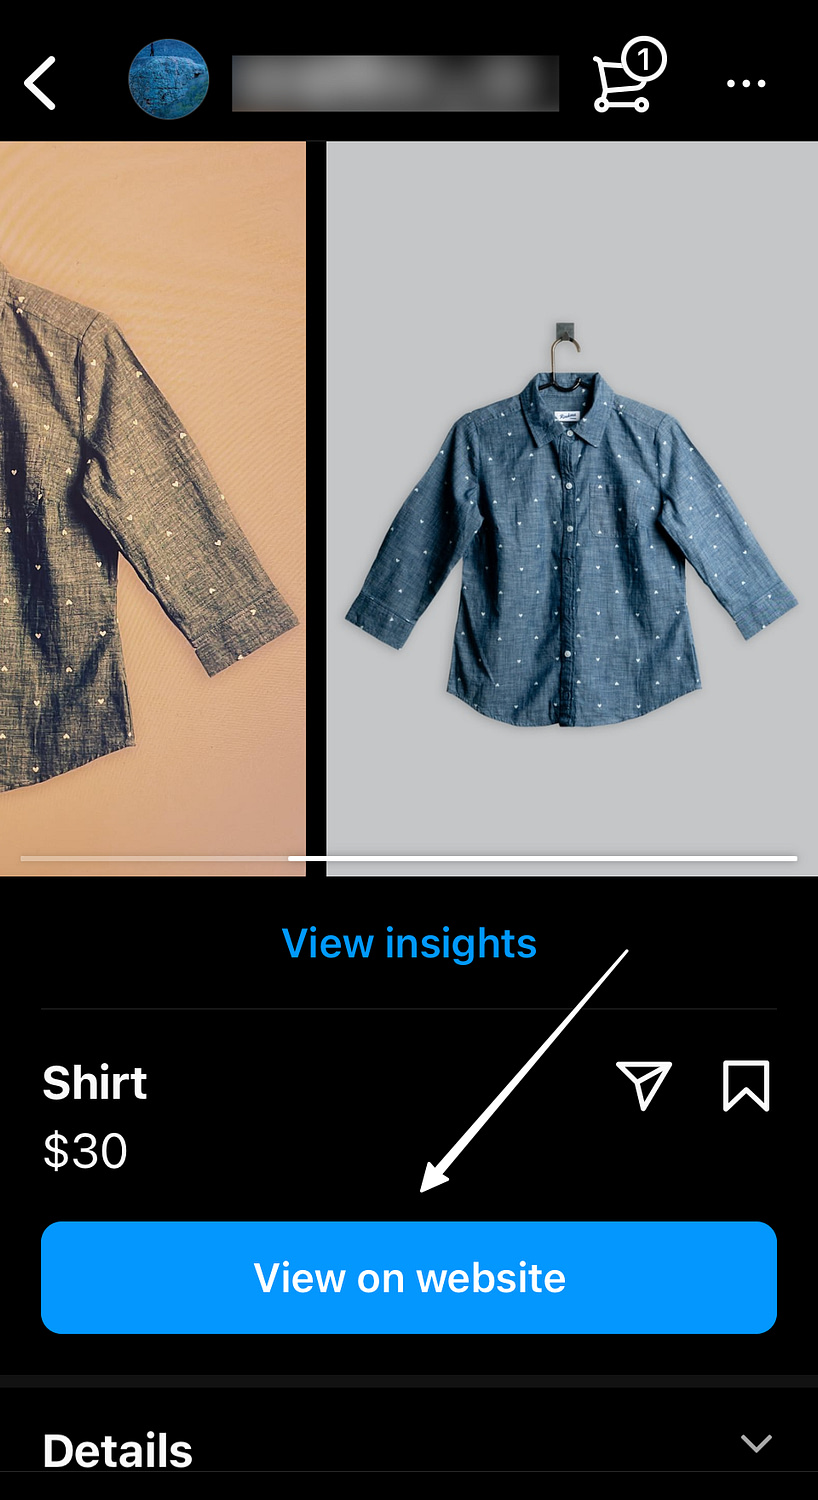 view on website button for Instagram Shoppable Posts